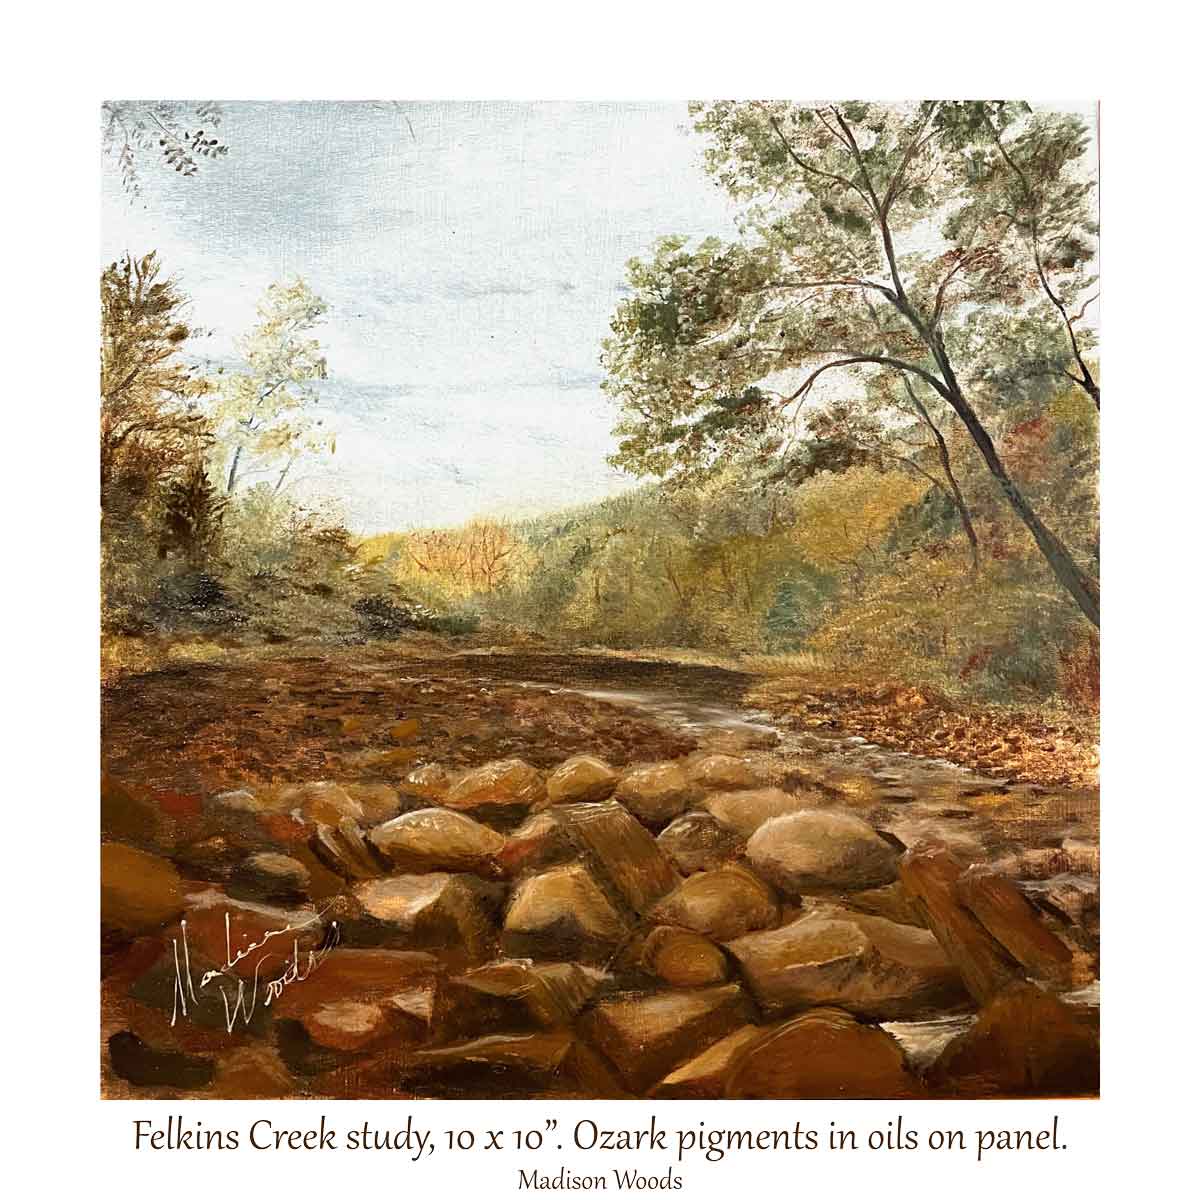 A painting of Felkins creek in Ozark pigments in oils by Madison Woods.